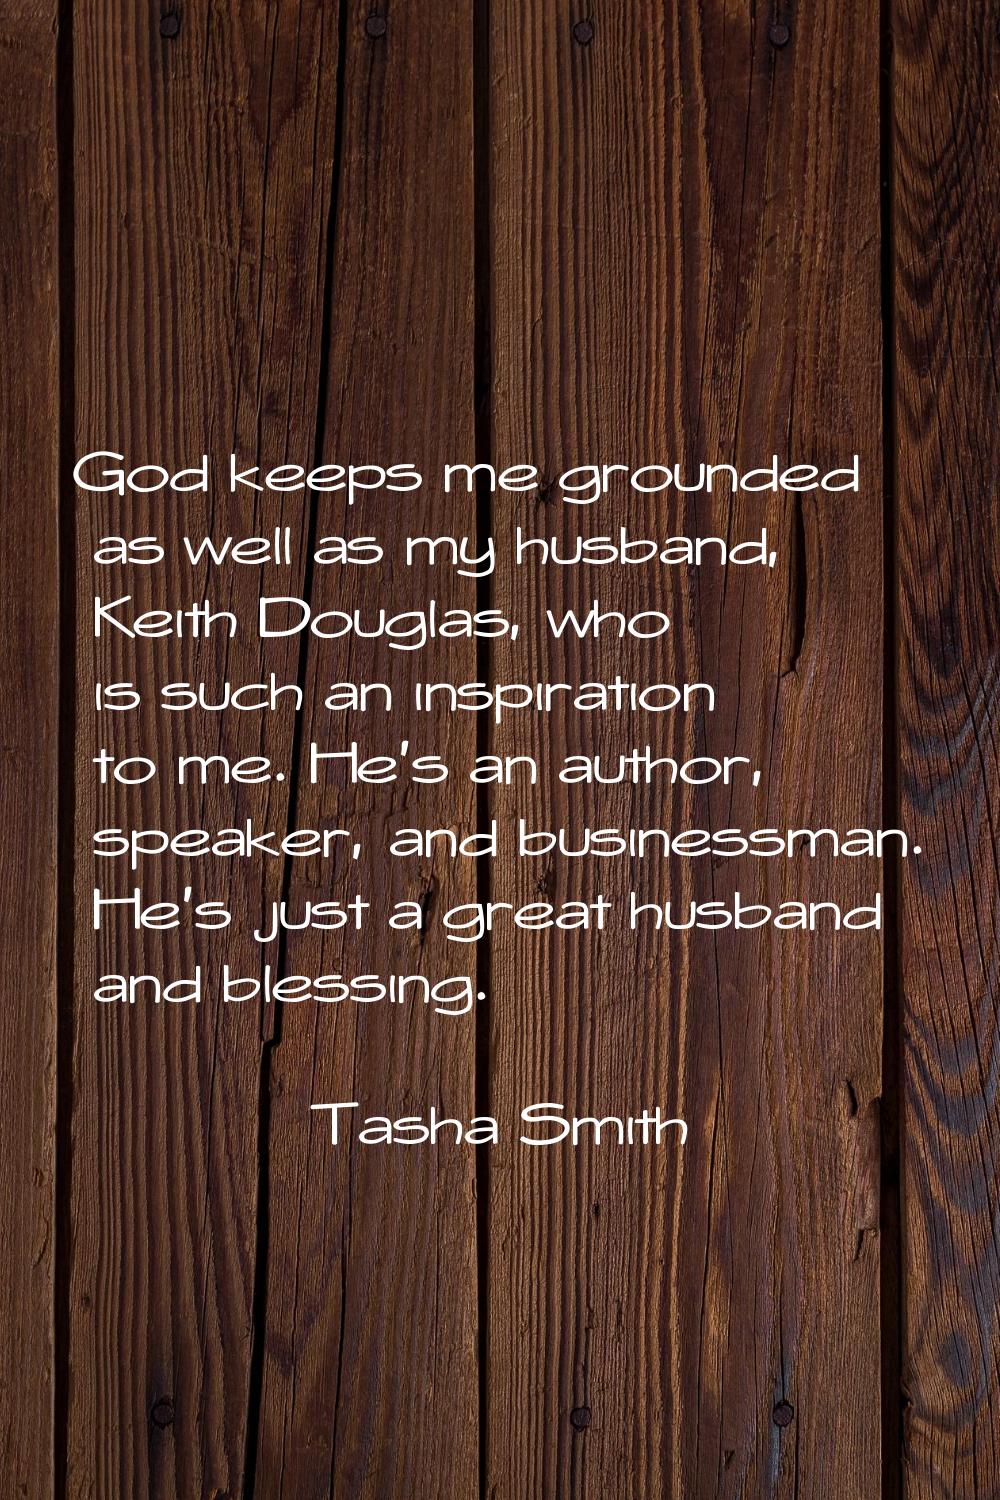 God keeps me grounded as well as my husband, Keith Douglas, who is such an inspiration to me. He's 